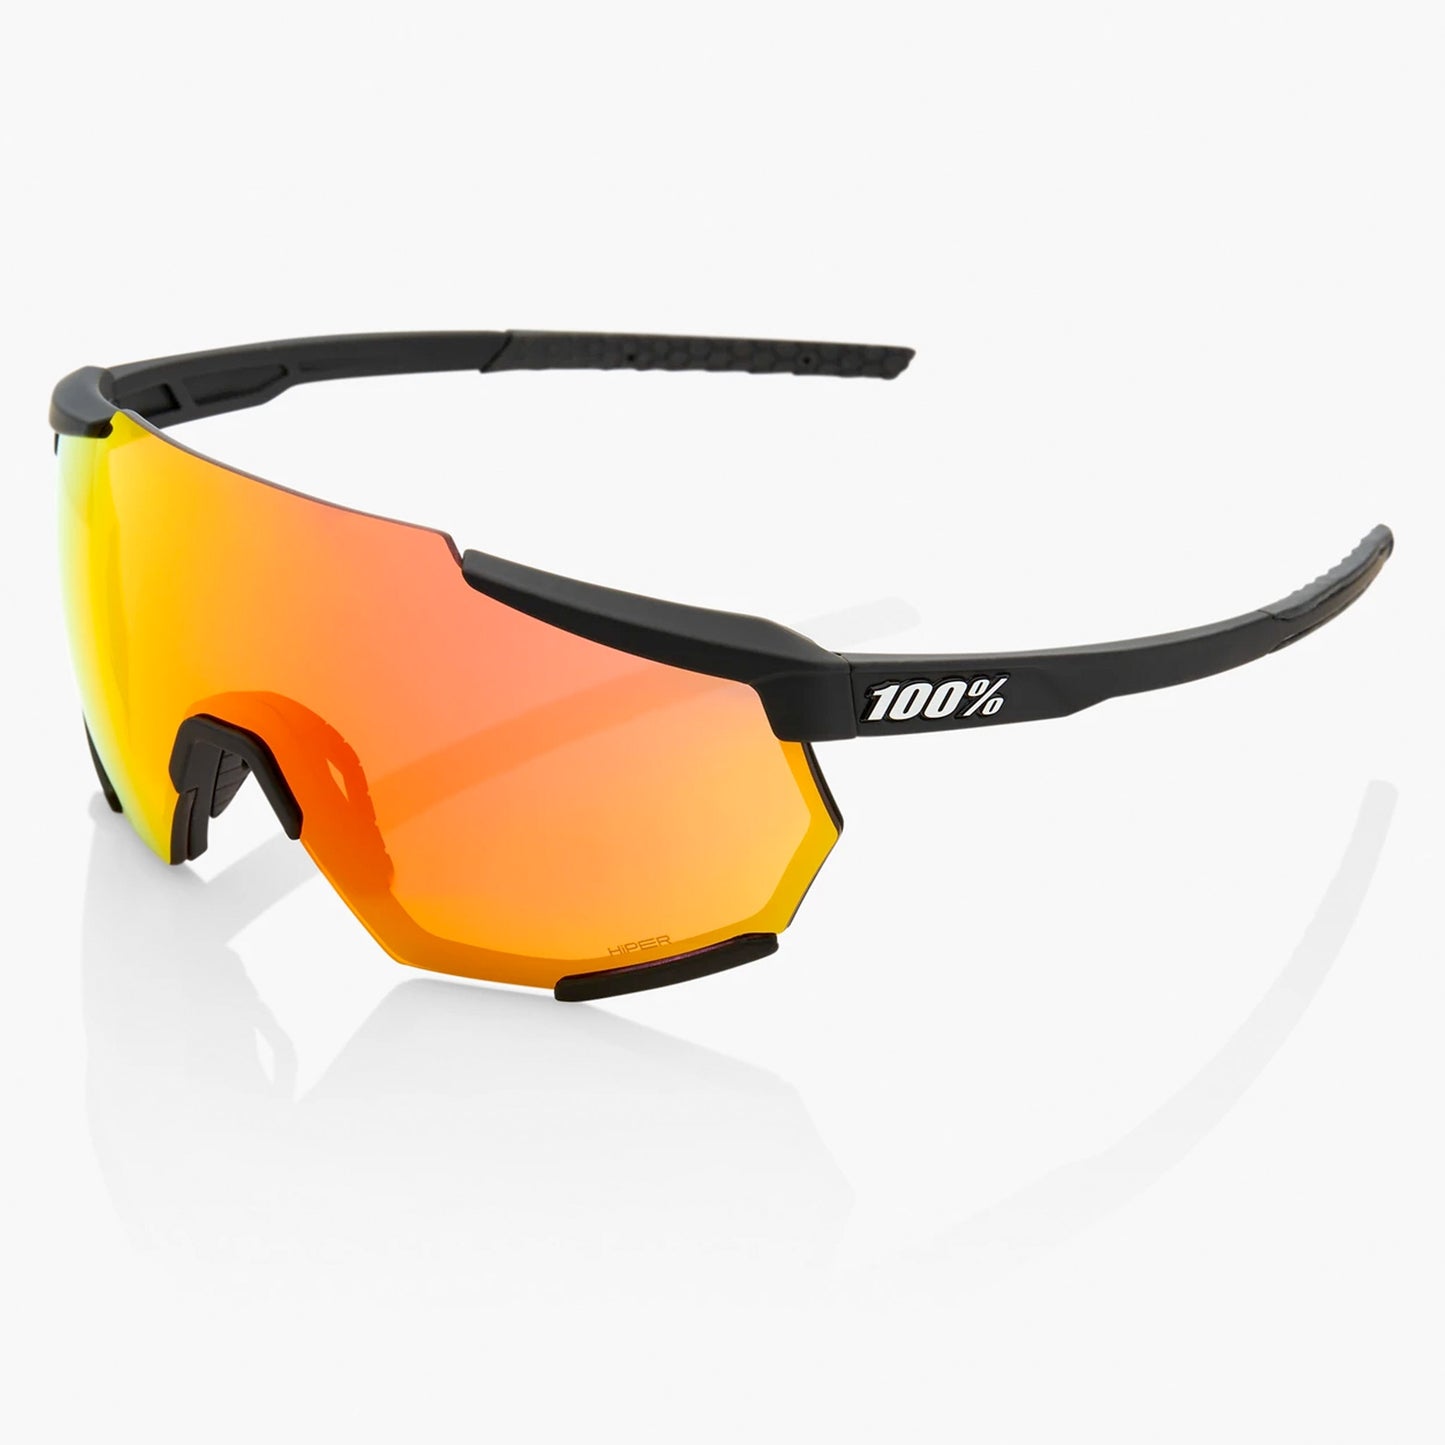 100% Racetrap Cycling Sunglasses, Soft Tact Black With Hiper Red Multilayer Mirror Lens + Clear Lens buy online at Woolys Wheels Sydney with free delivery